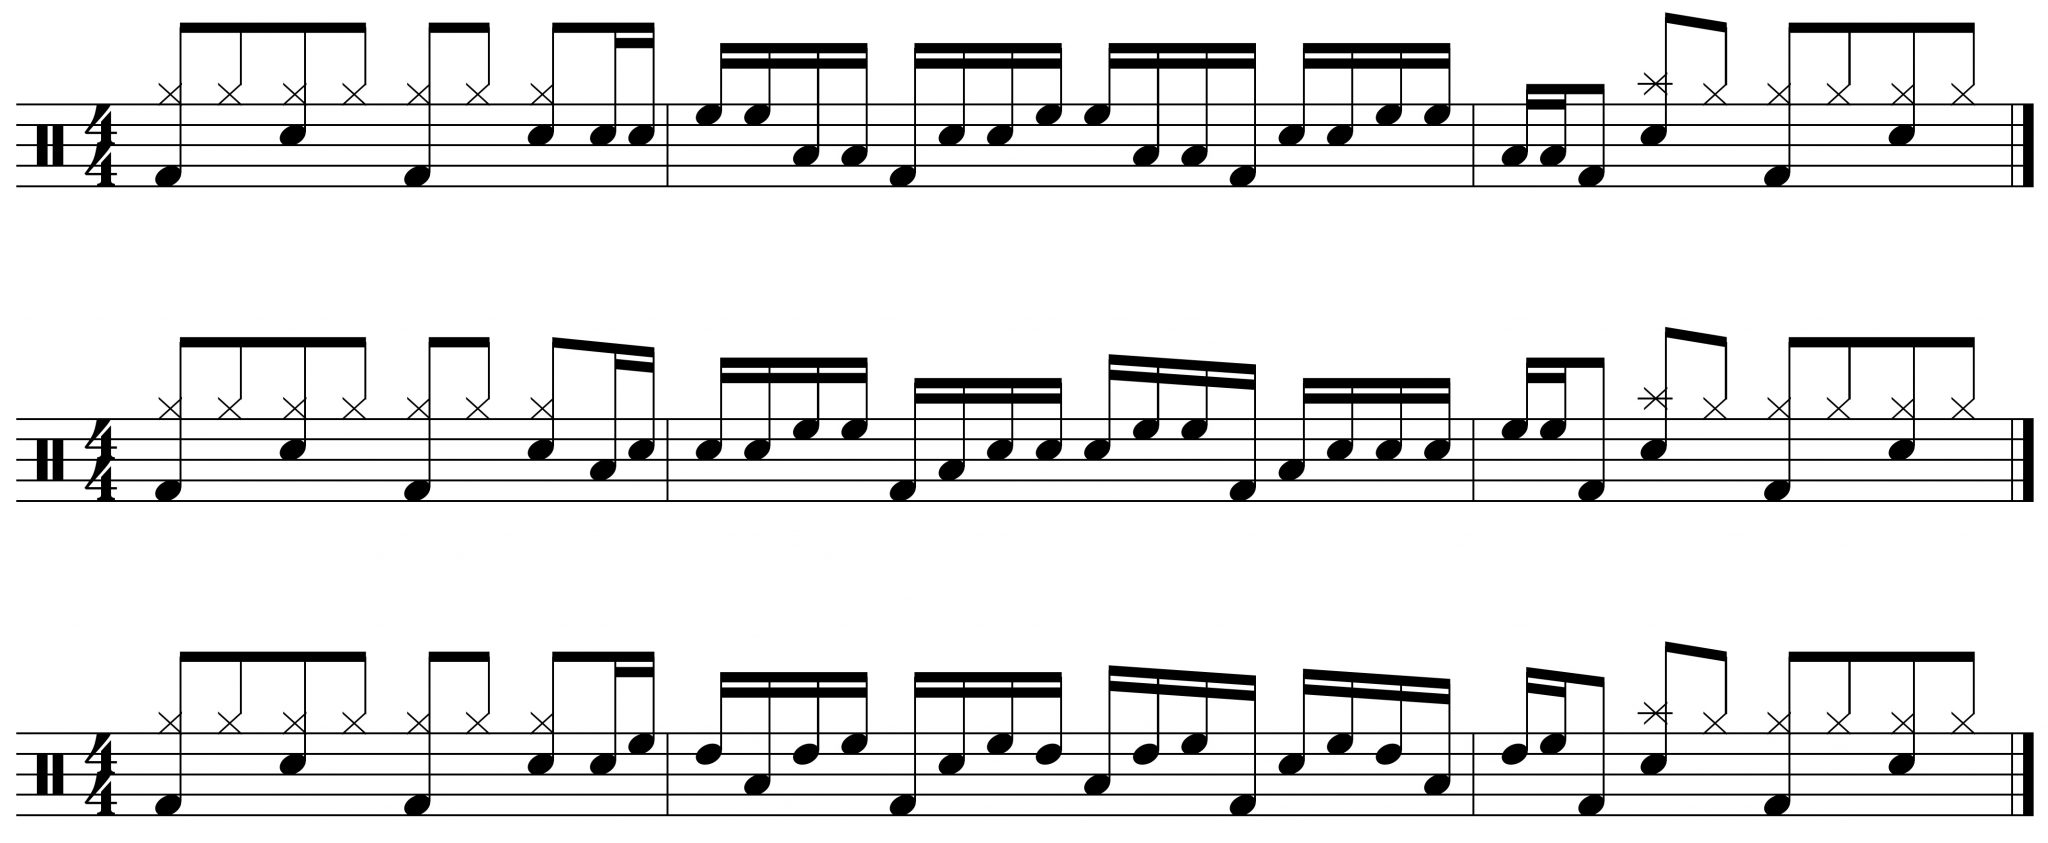 simple variations on the drum fill